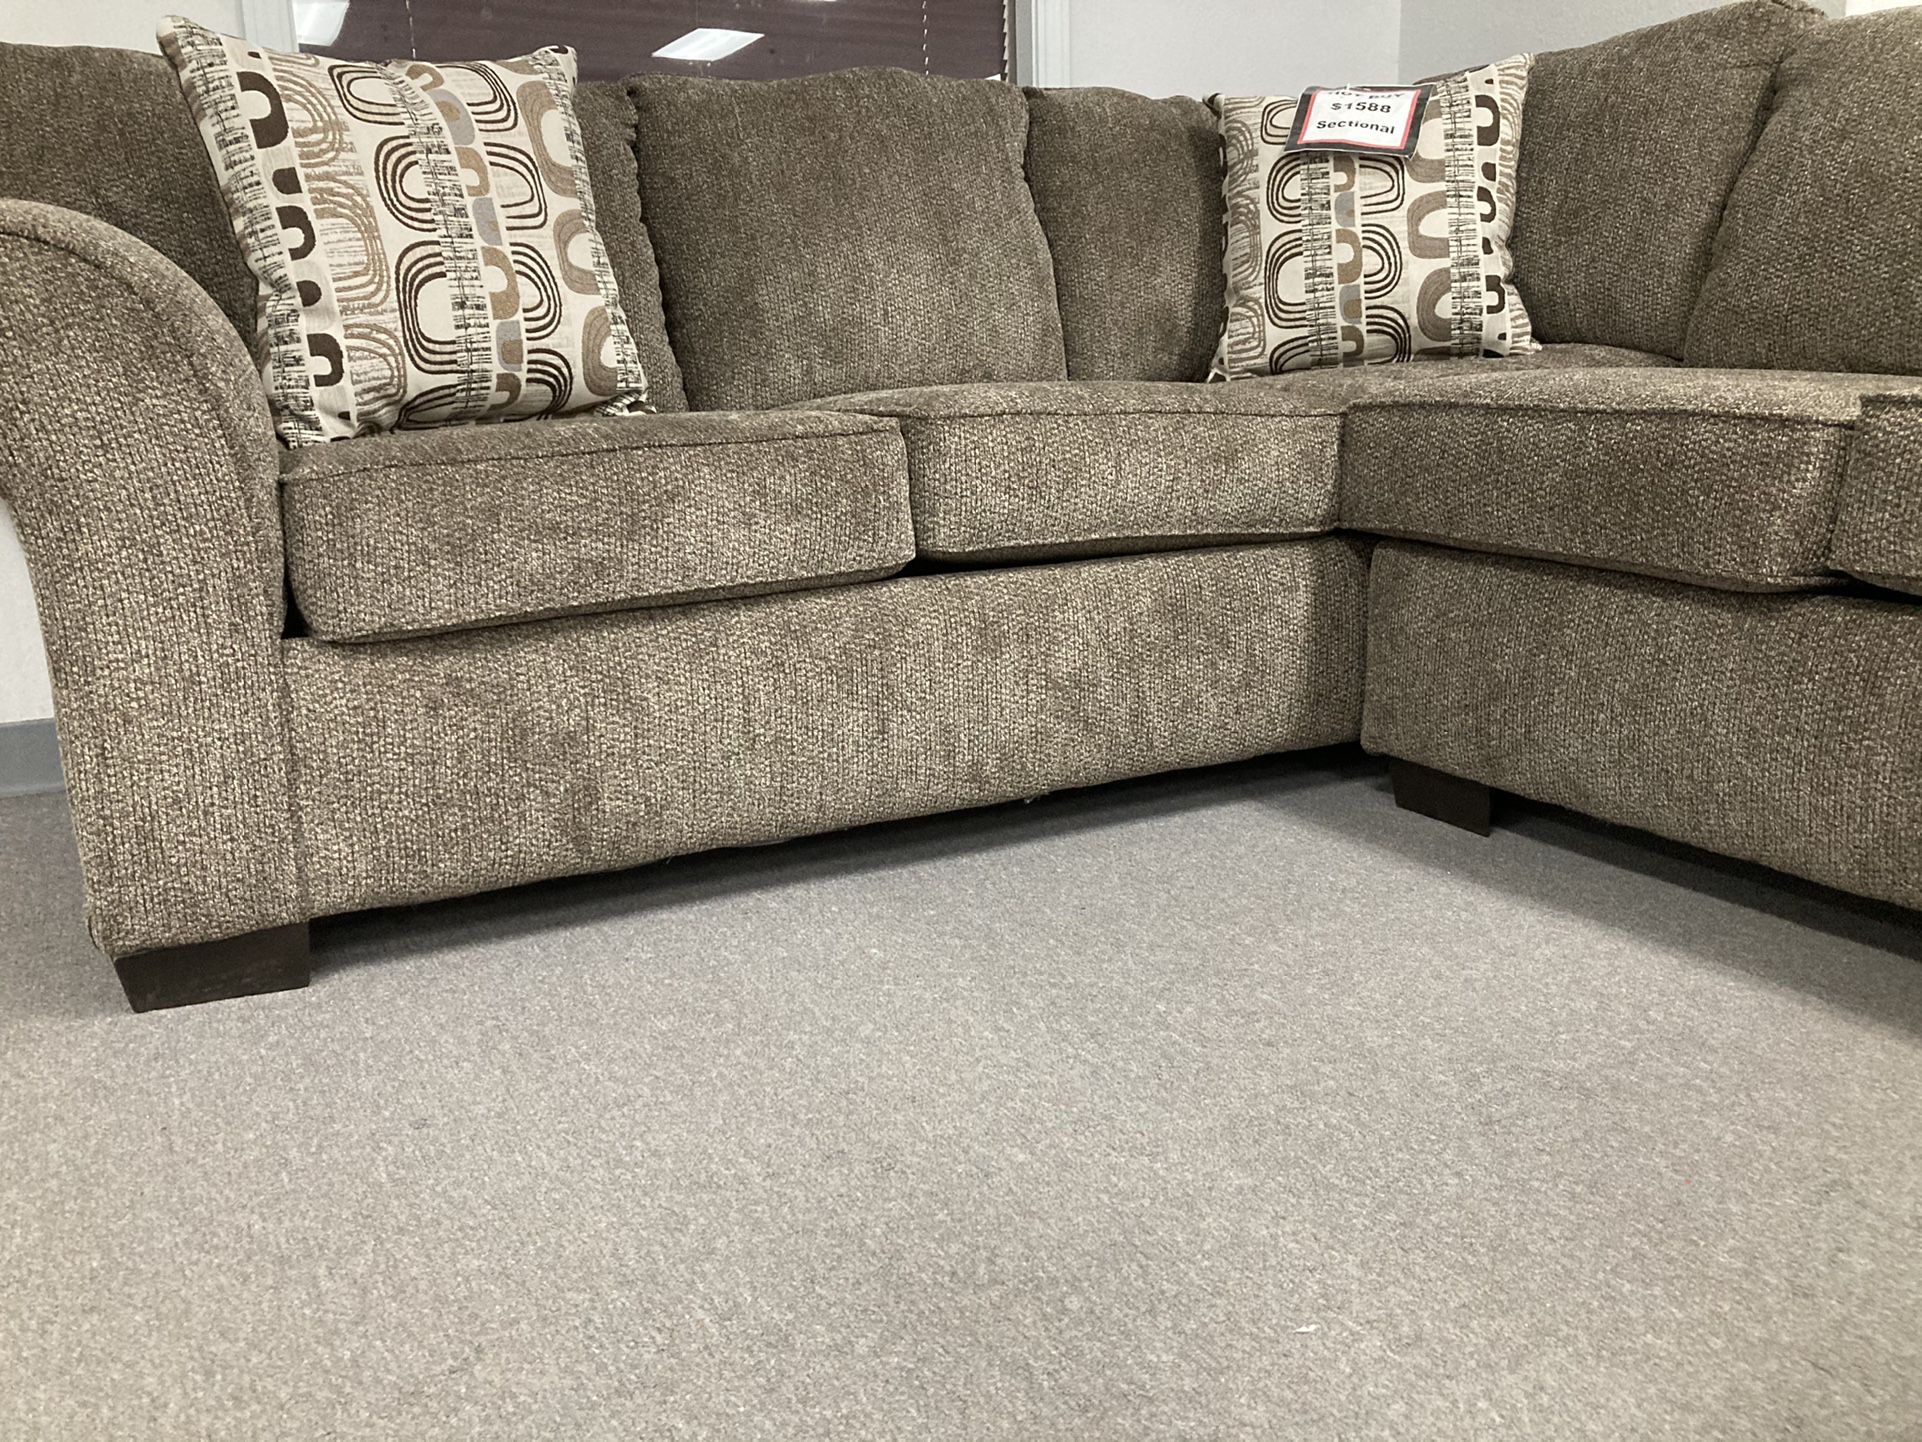 Brand New Jesse Coco Sectional With Reversible Ottoman! Low As $39 Down! No Credit Needed